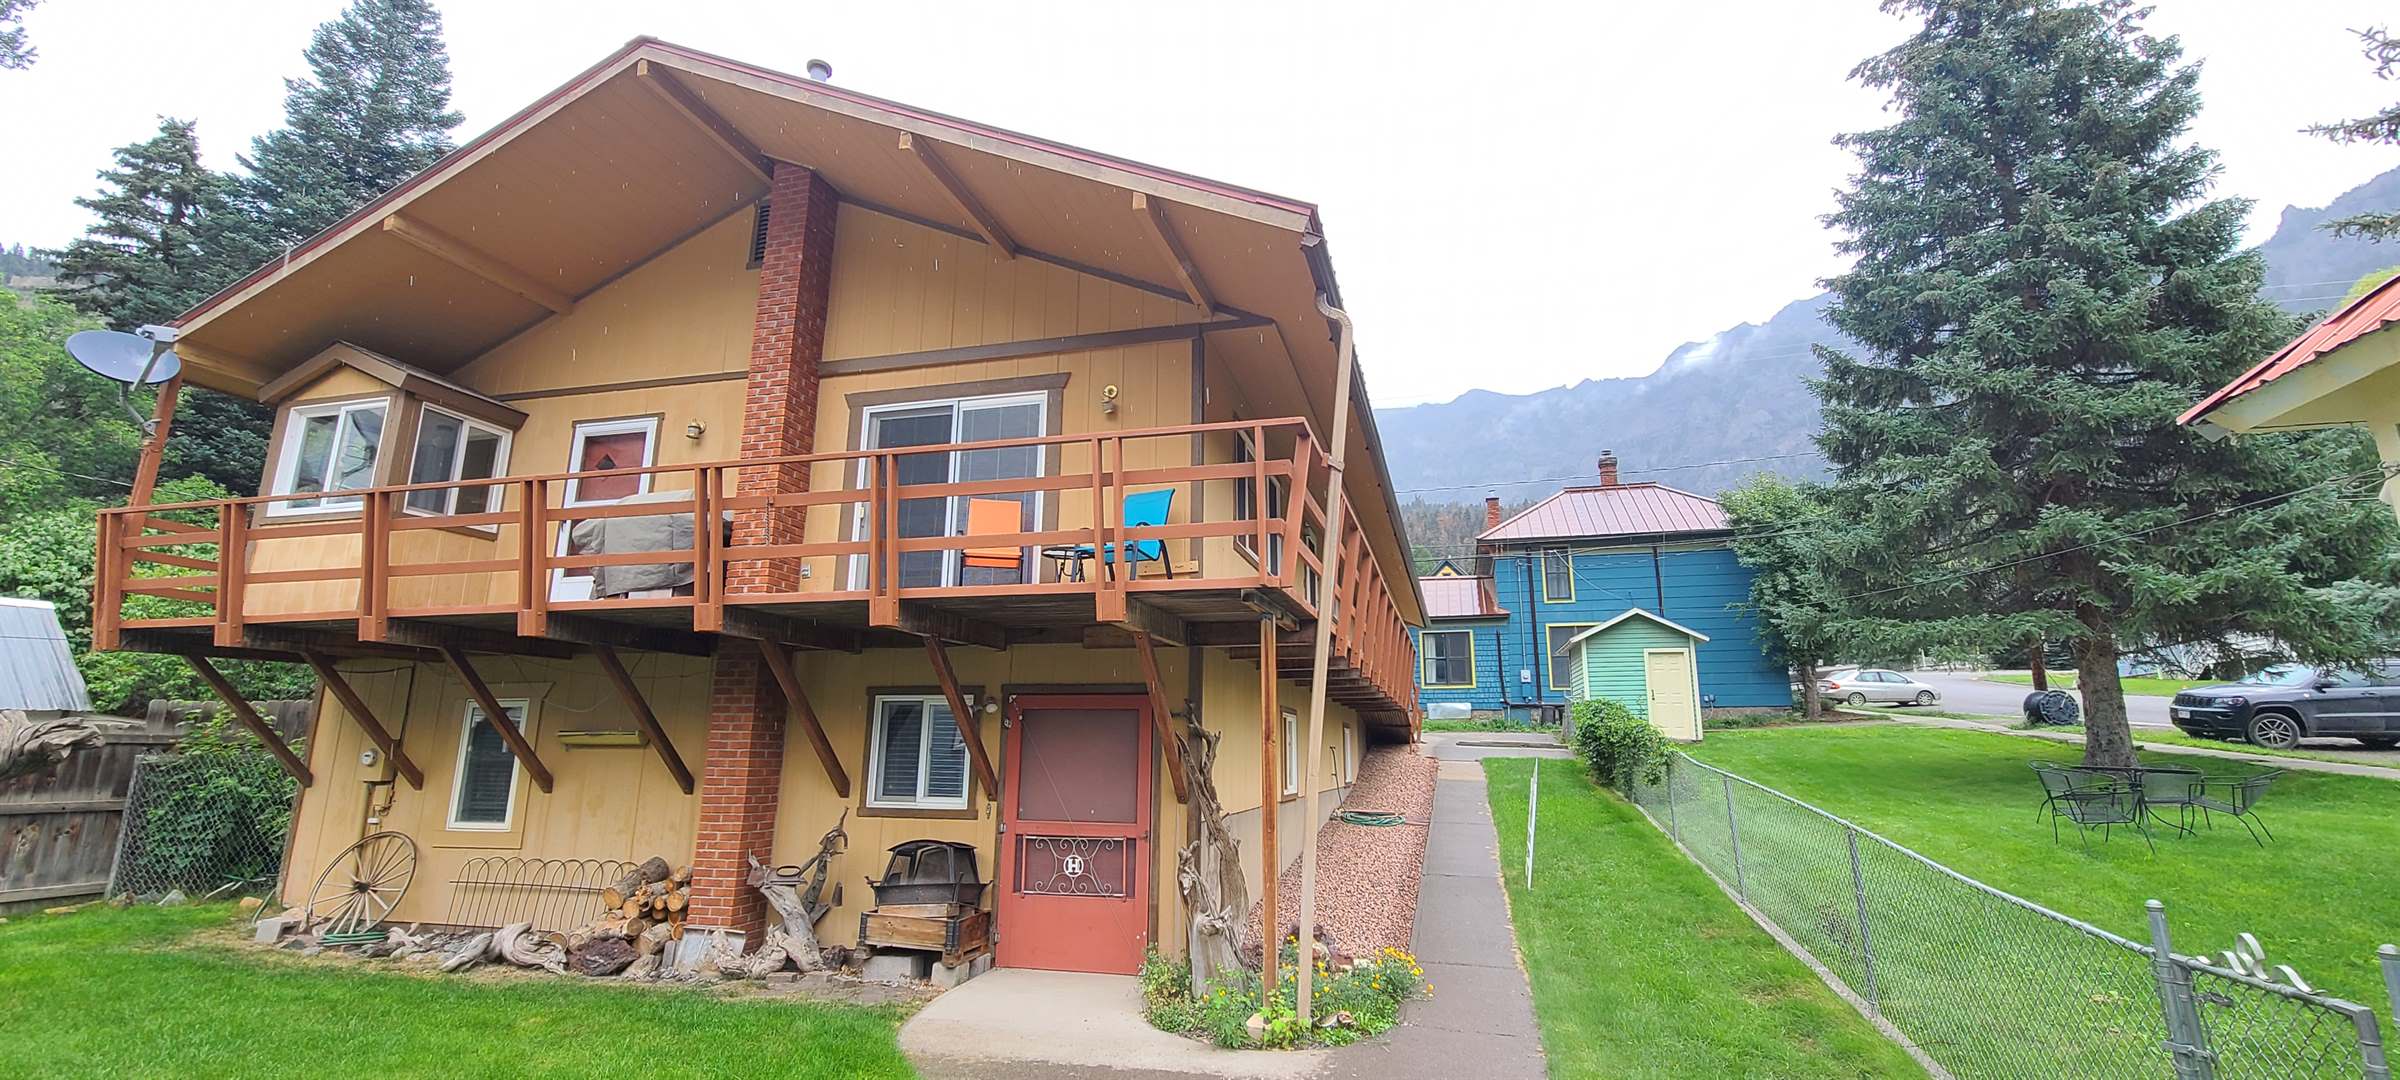 302 1/2 2nd Street, Ouray, CO 81427